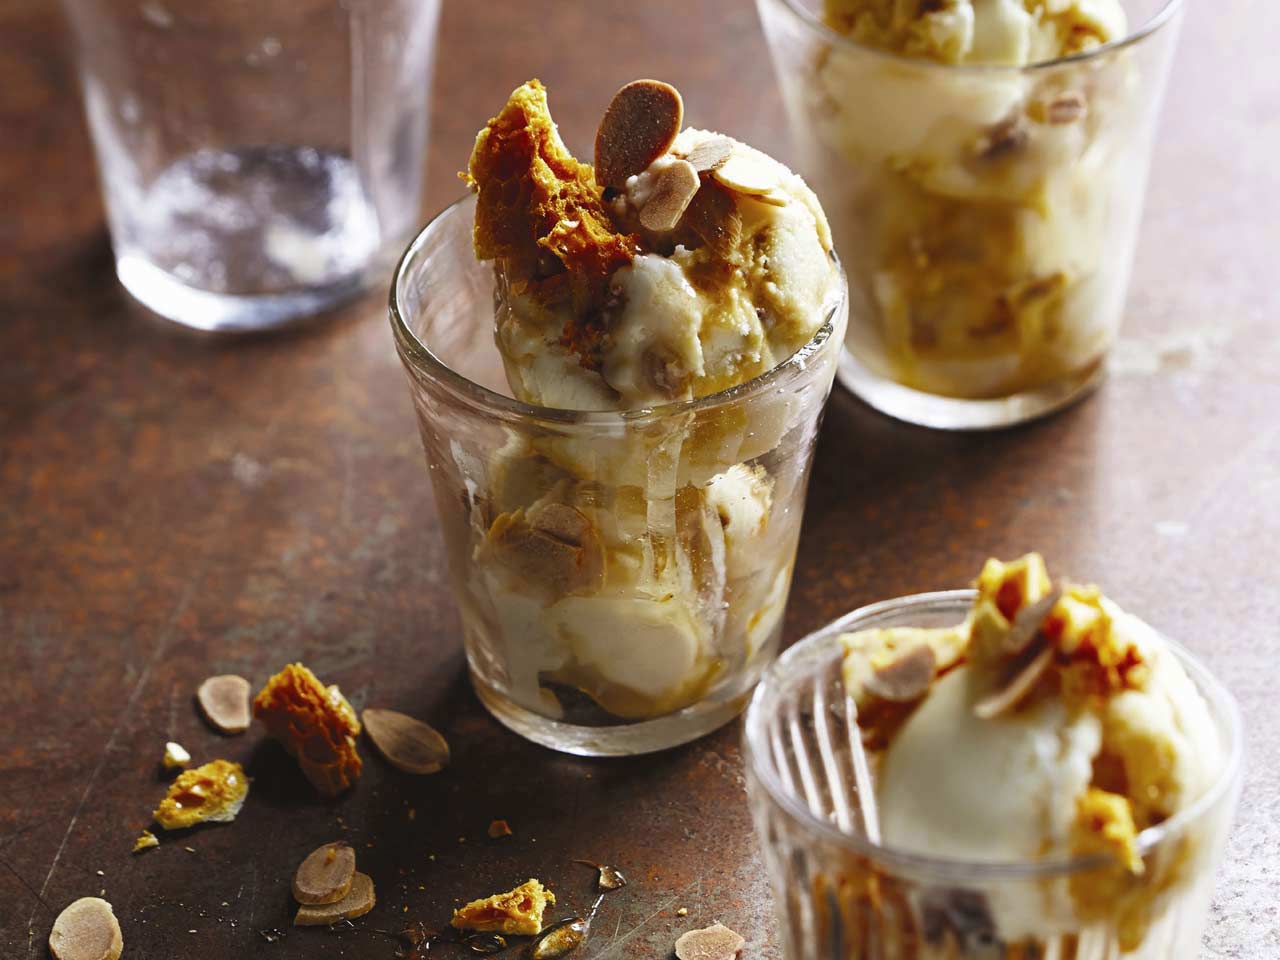 Honey ice cream with honeycomb and toated almonds